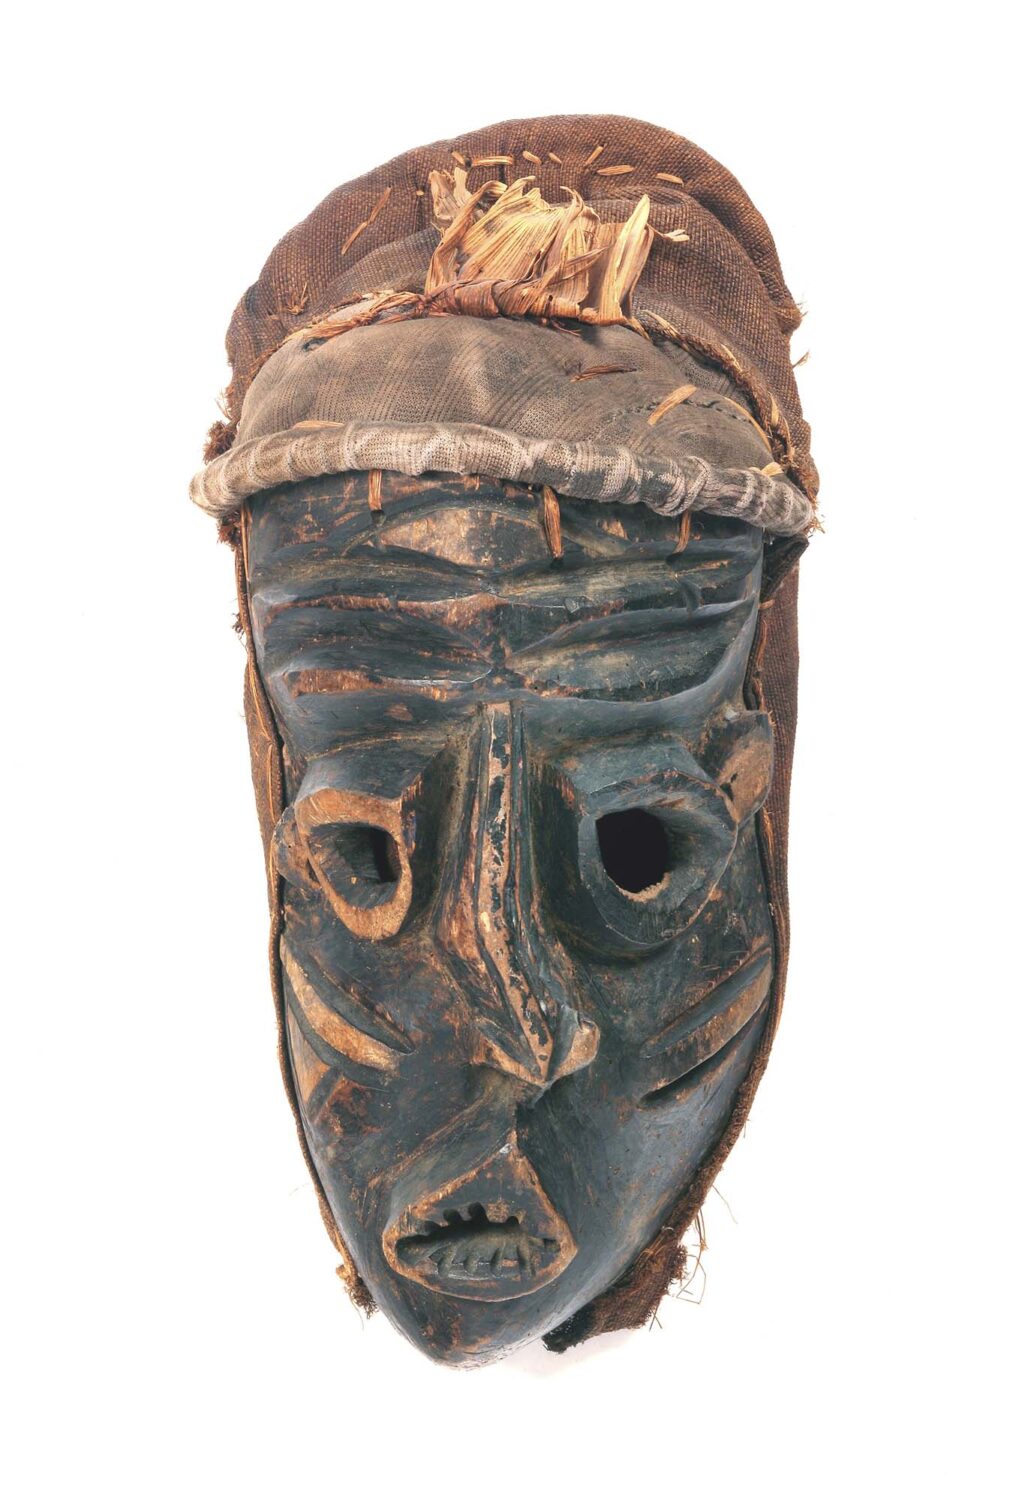 thumbnail of Mask with skewed features made with wood, black pigment and textile.